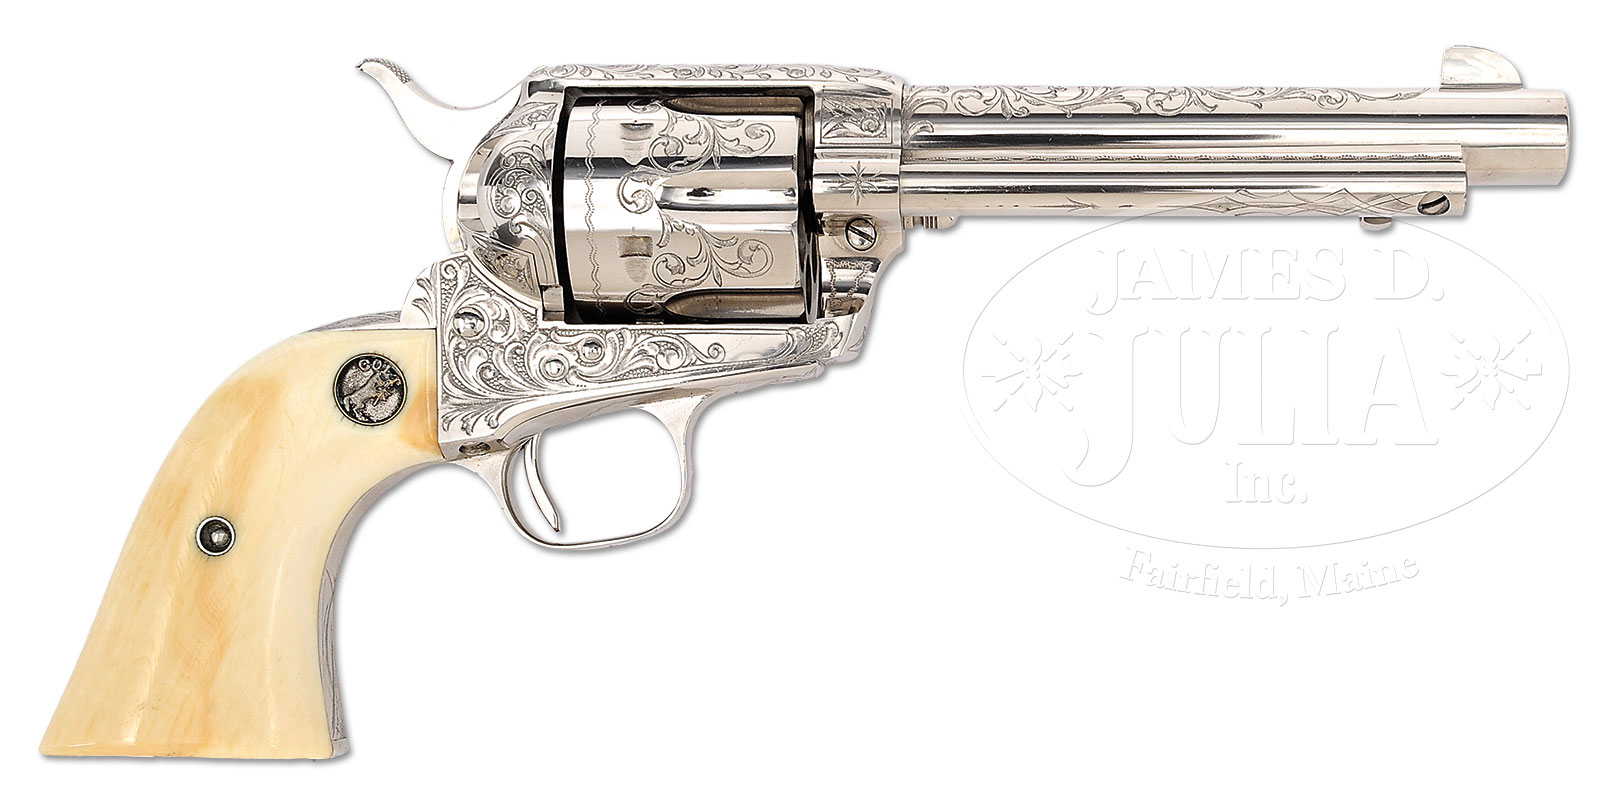 EXTREMELY RARE TRANSITIONAL COLT SINGLE ACTION ARMY REVOLVER IN A SCARCE CALIBER FACTORY ENGRAVED BY WILBUR GLAHN WITH IVORY GRIPS AND FACTORY LETTER.